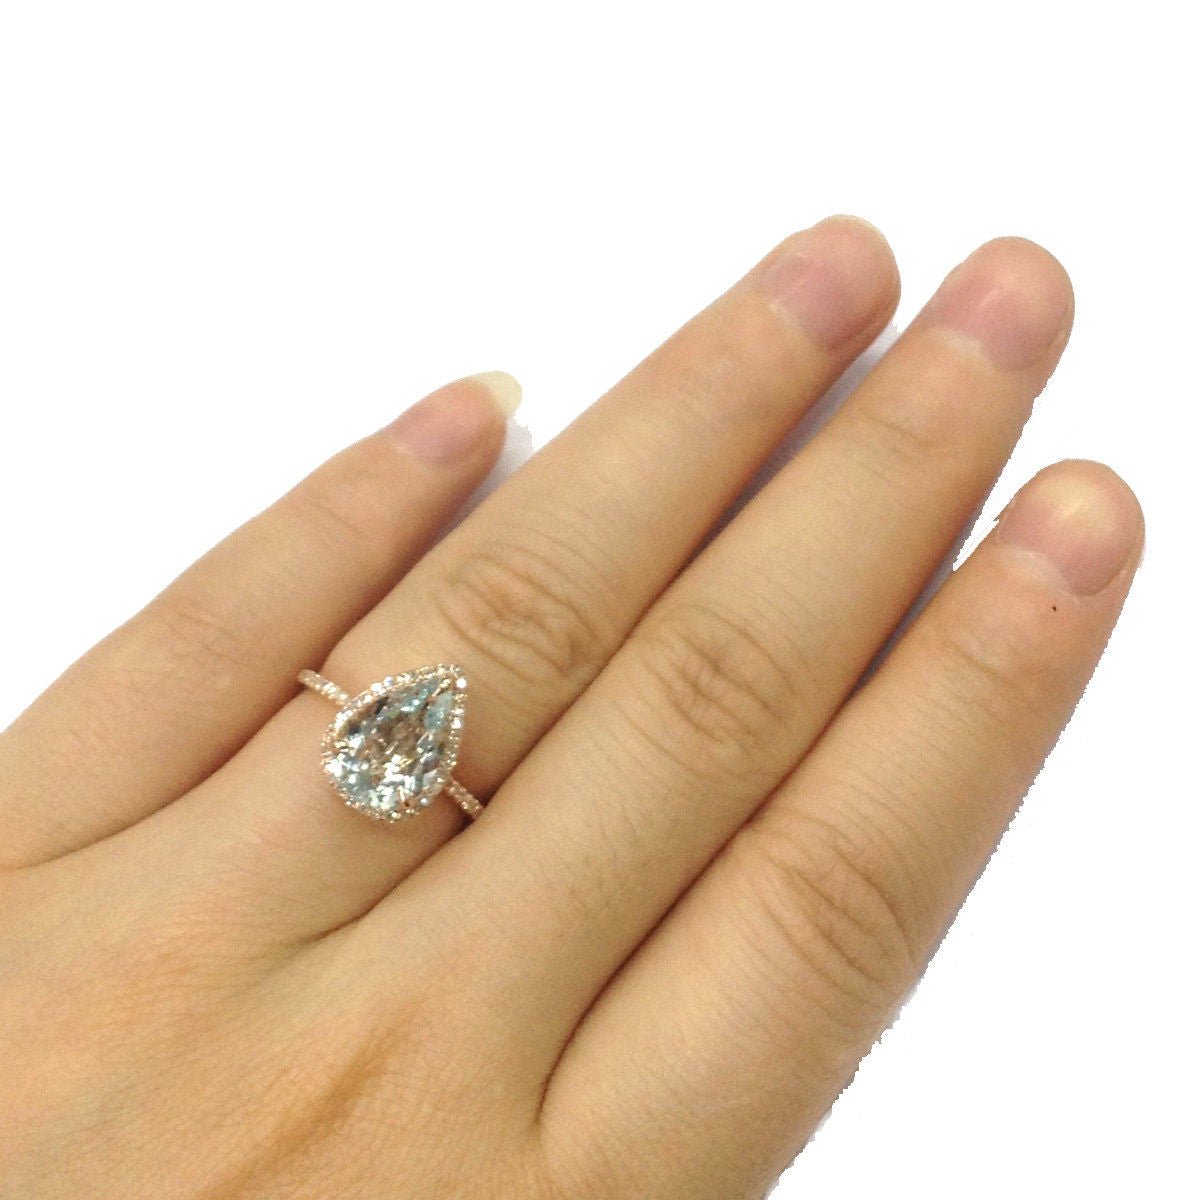 Elongated Pear Natural Aquamarine Halo Ring with Diamond Accents - Lord of Gem Rings